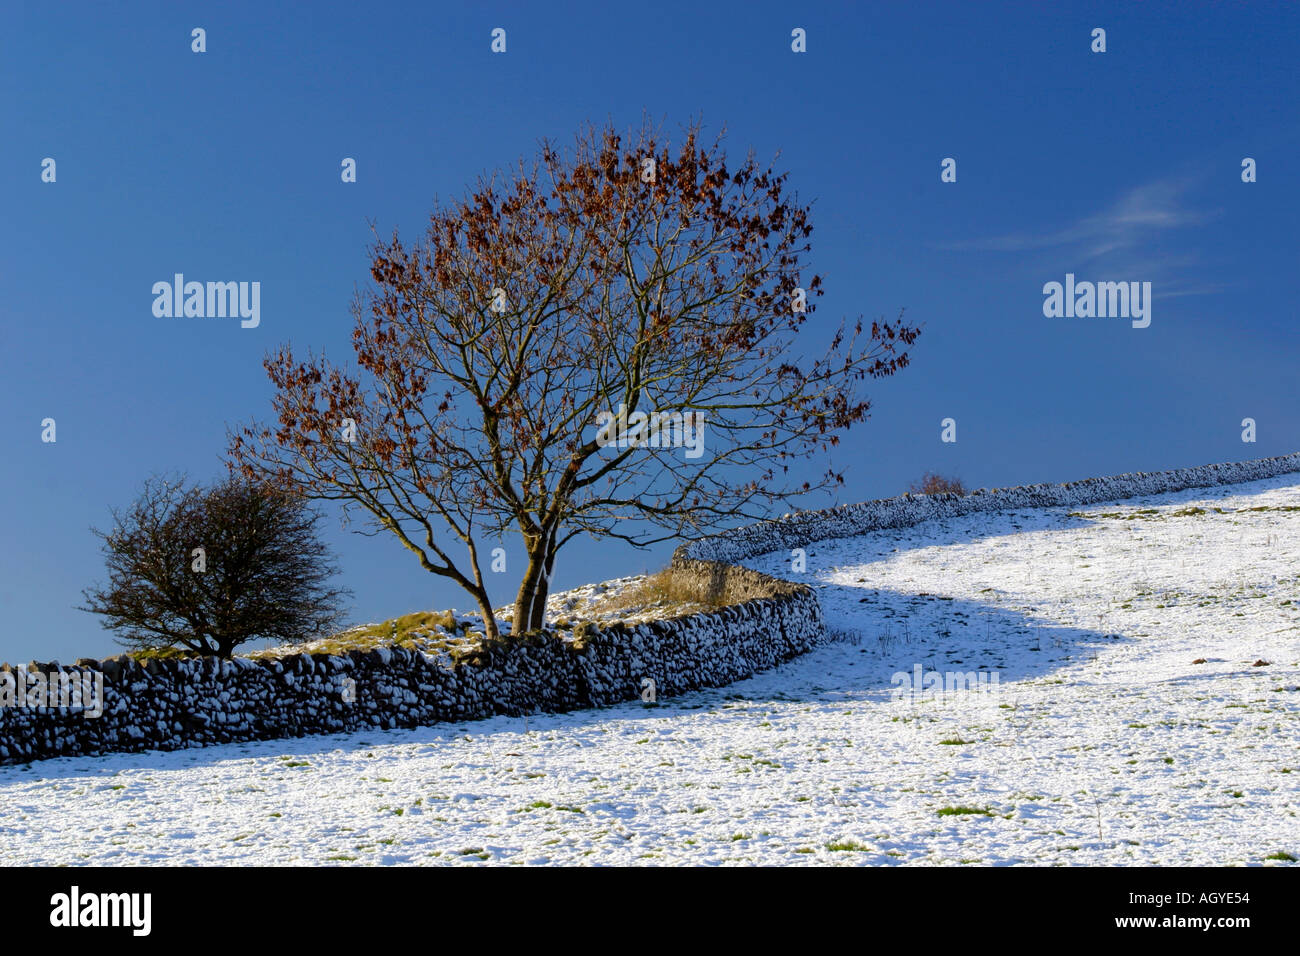 Snow covered tree and drystone wall near Monsal Head in the Derbyshire Peak District England Stock Photo